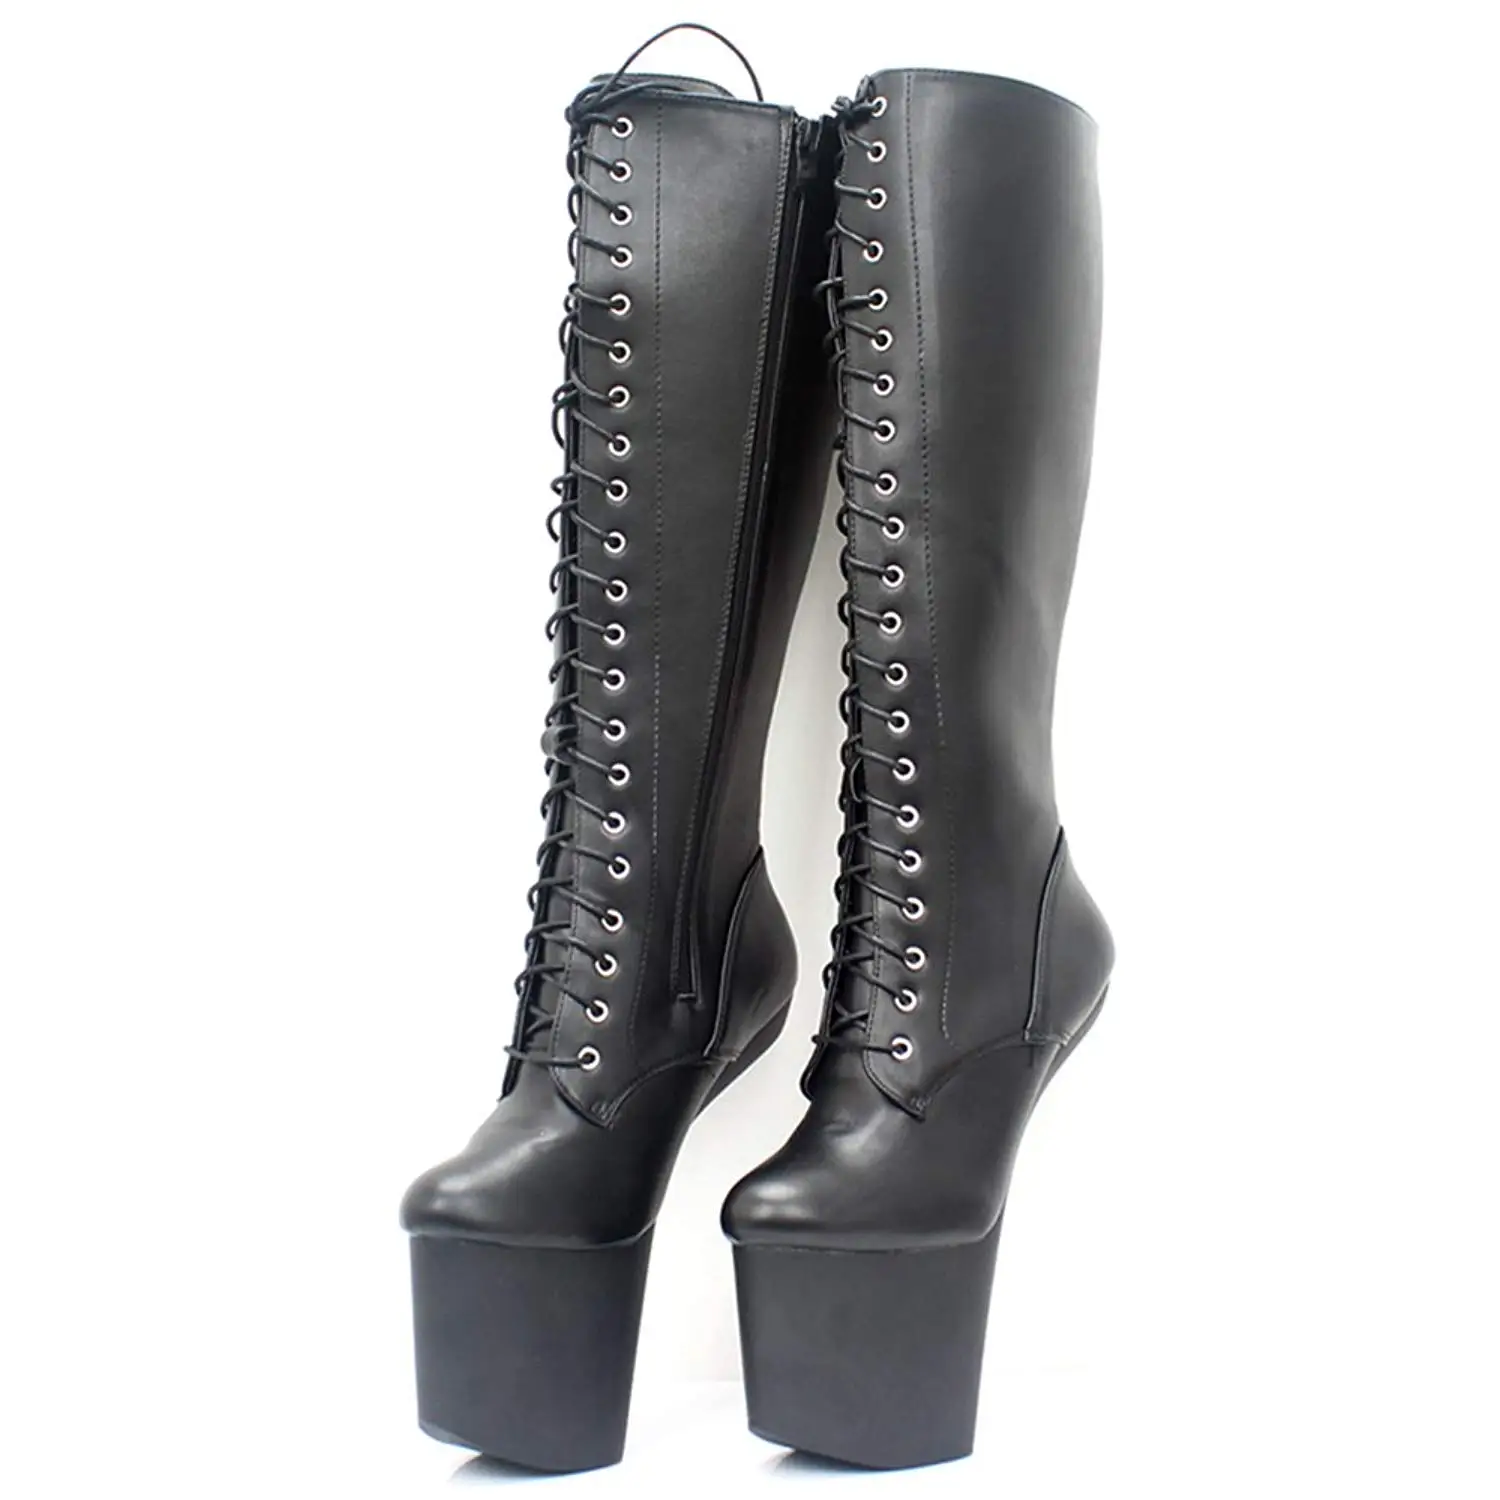 Cheap Fetish Boots Find Fetish Boots Deals On Line A